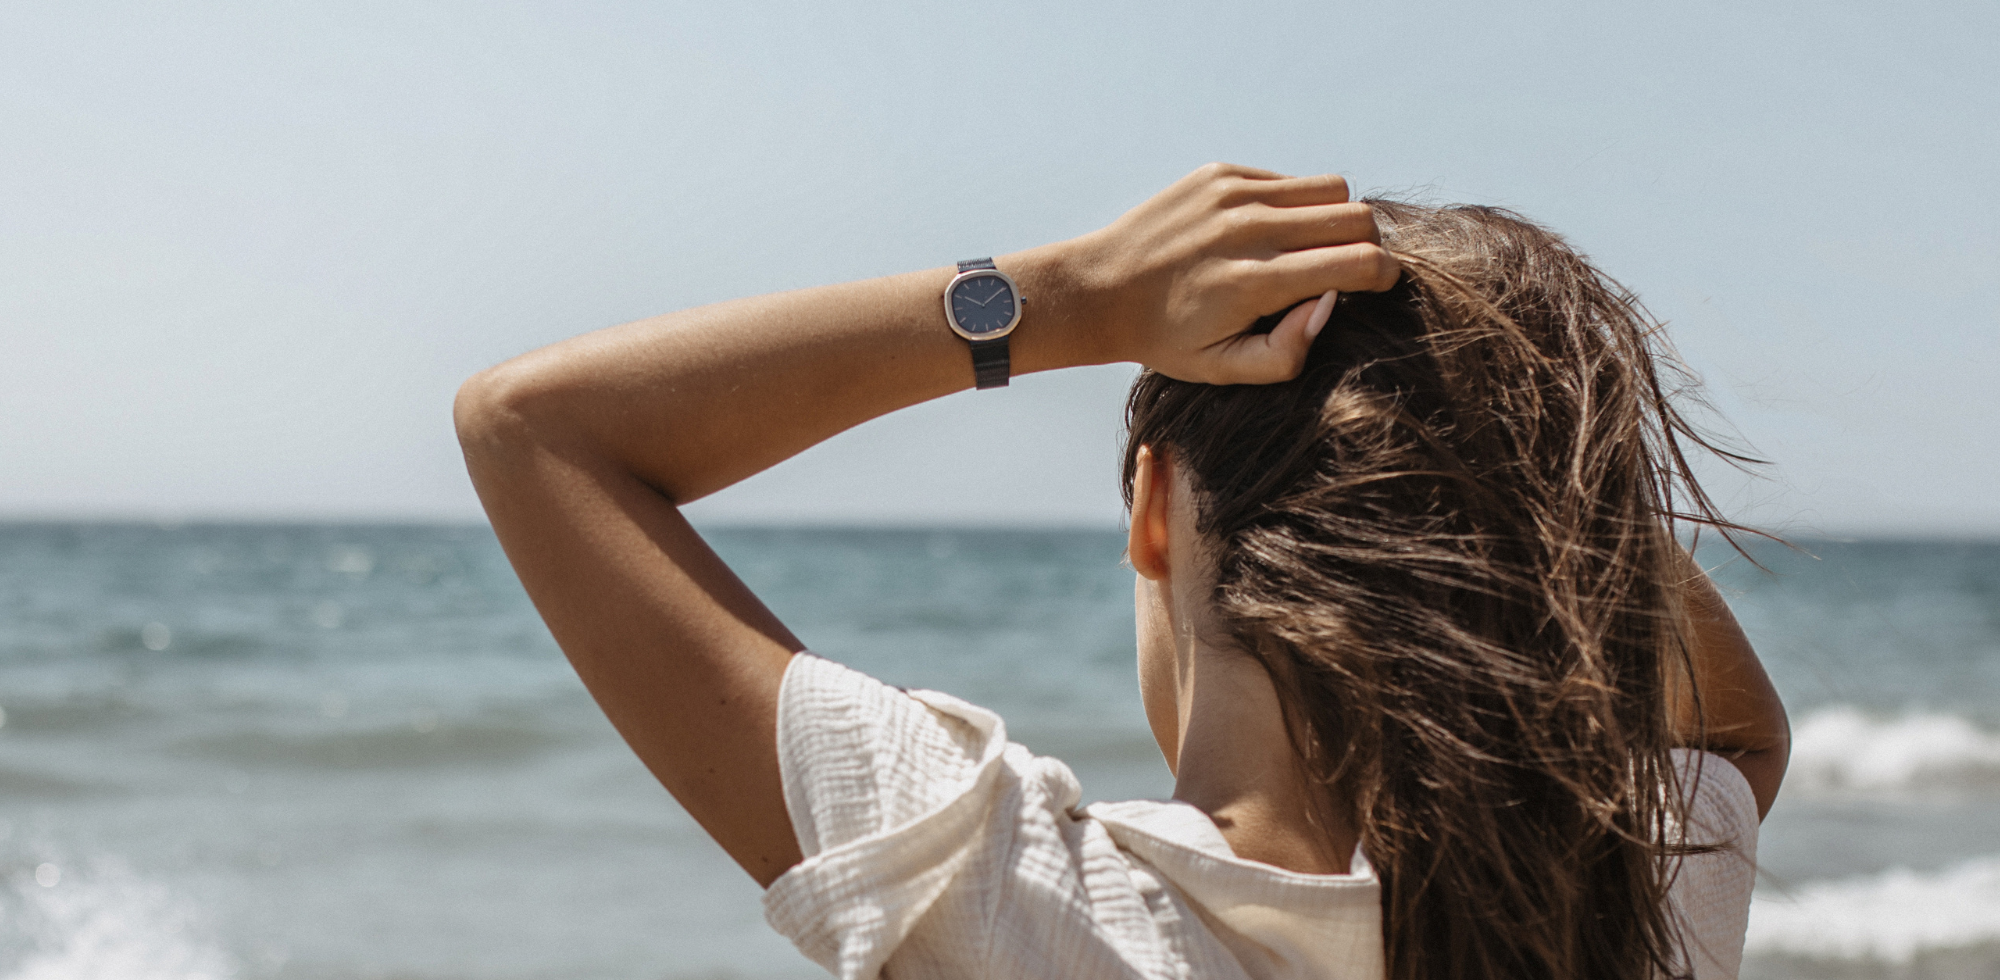 Obaku Denmark Story, about the brand and company